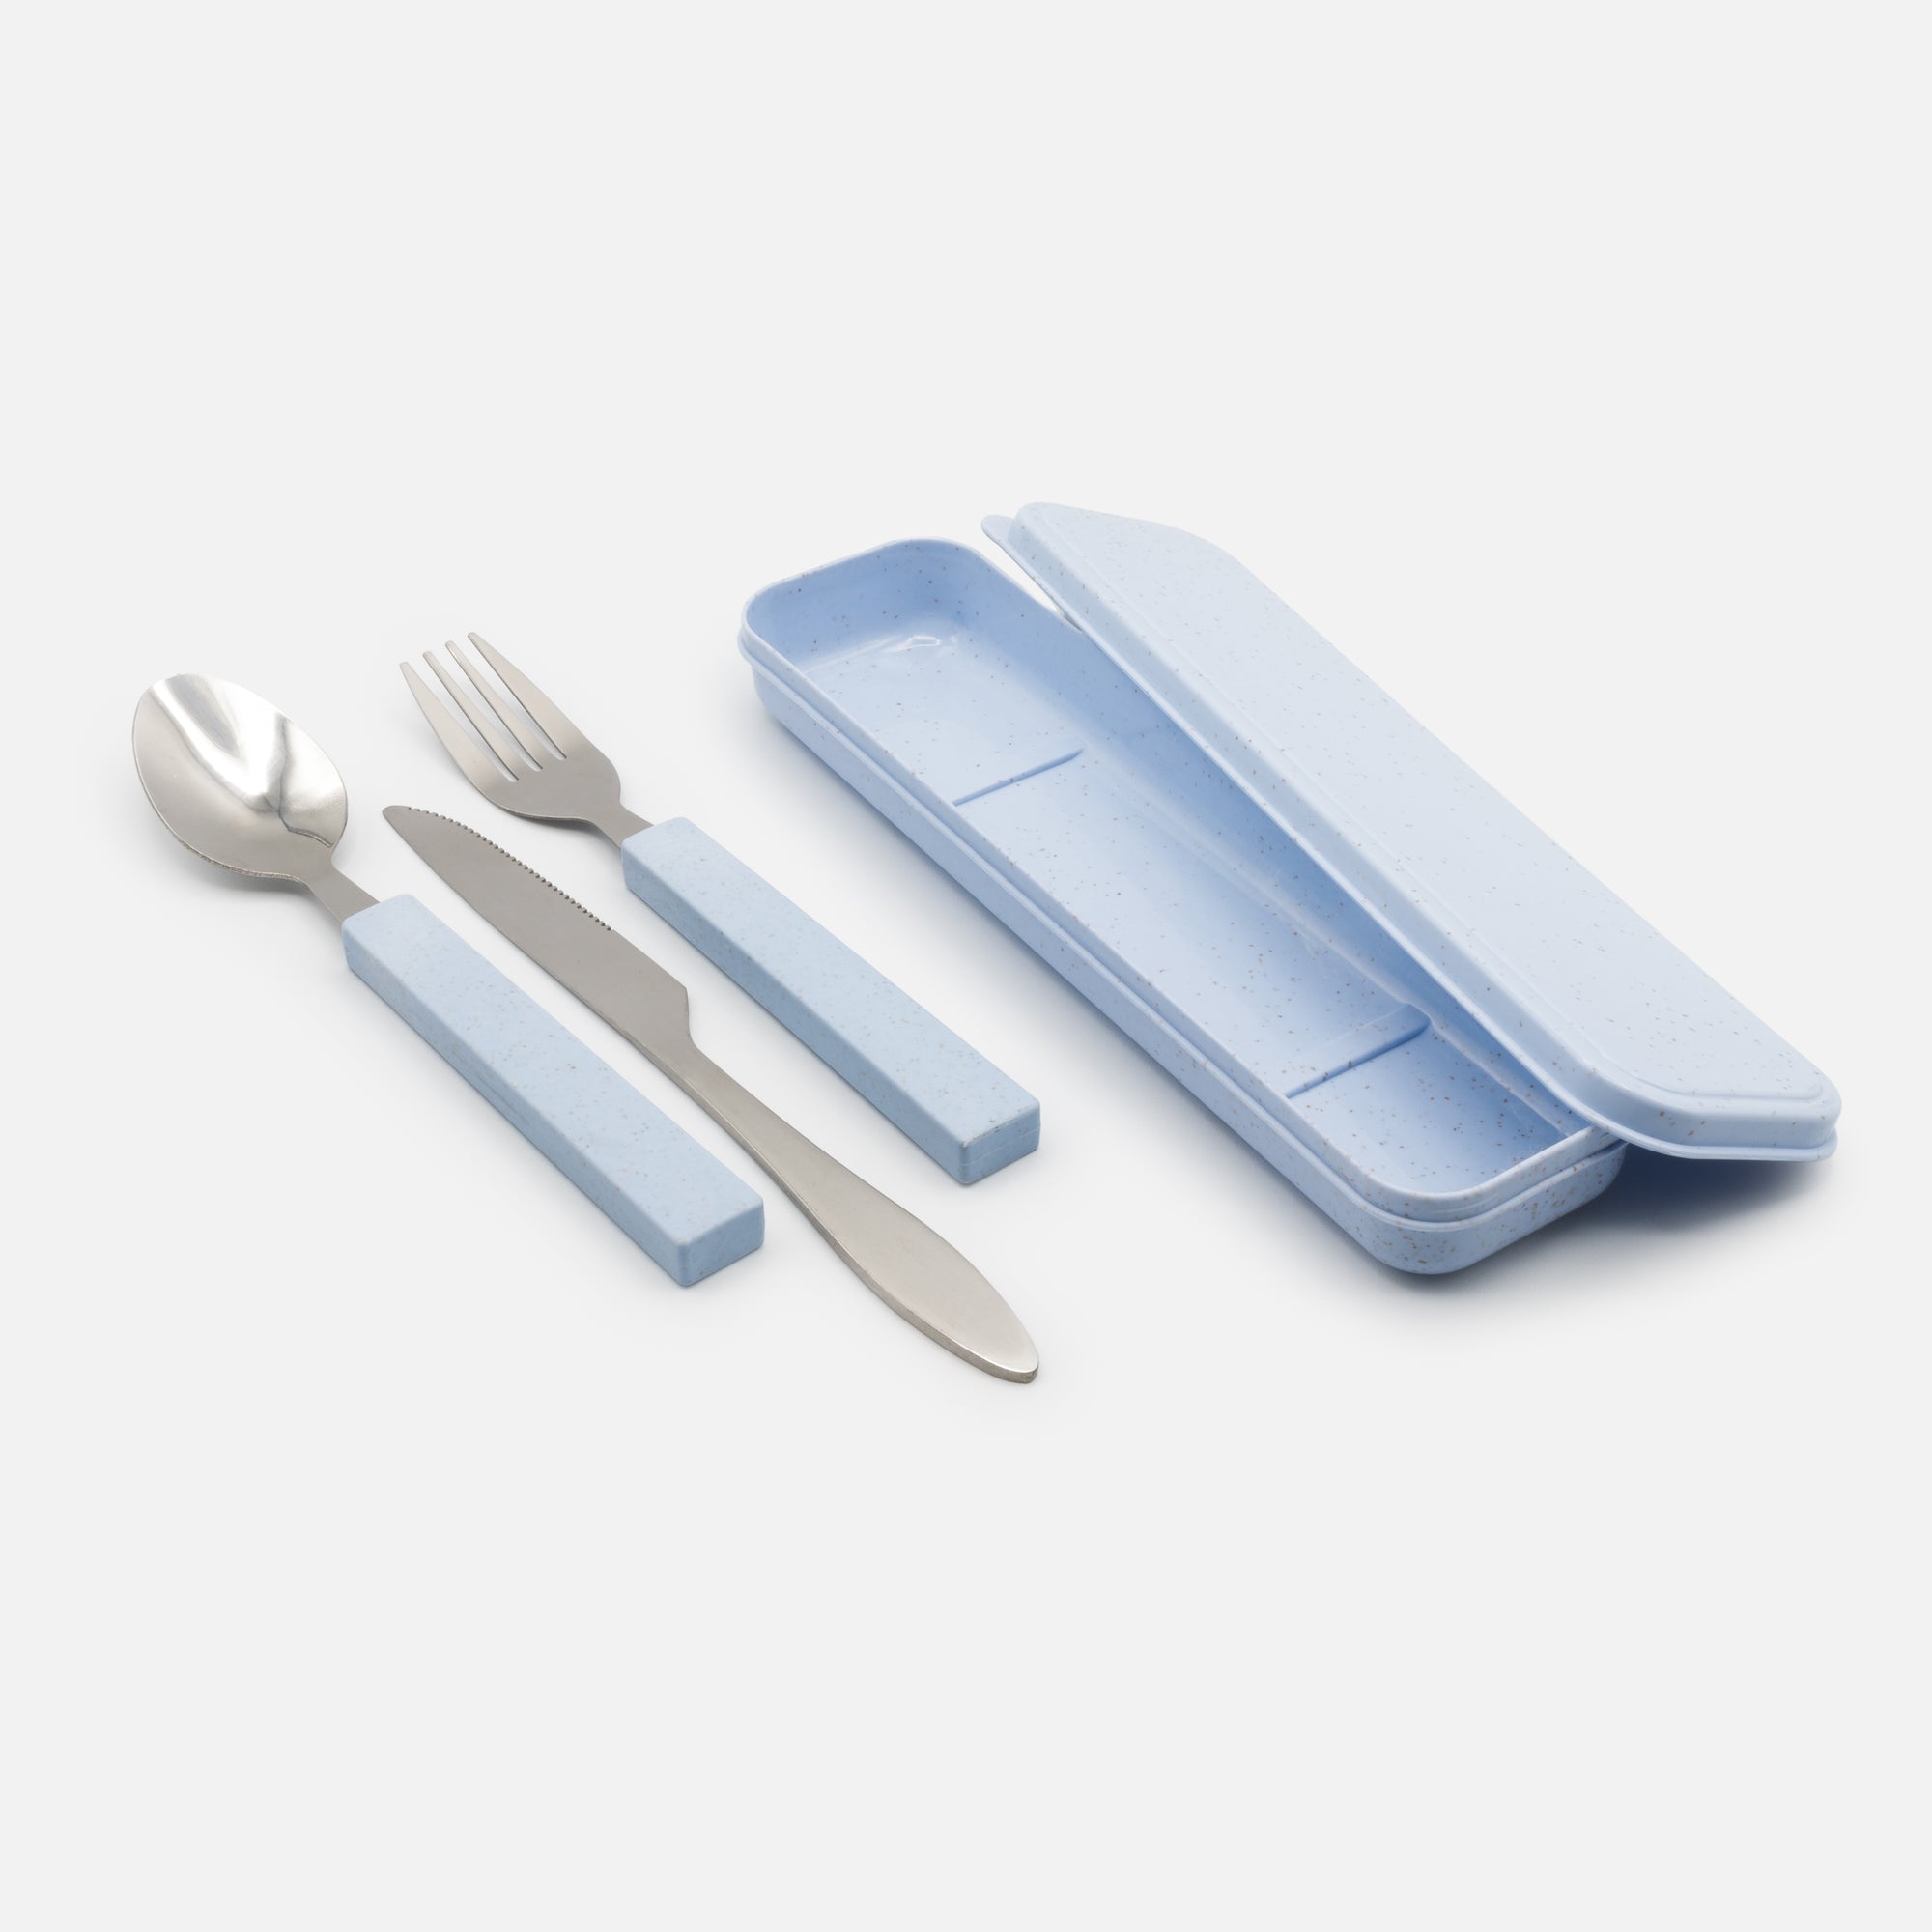 Set of three utensils with pale blue speckled carrying case